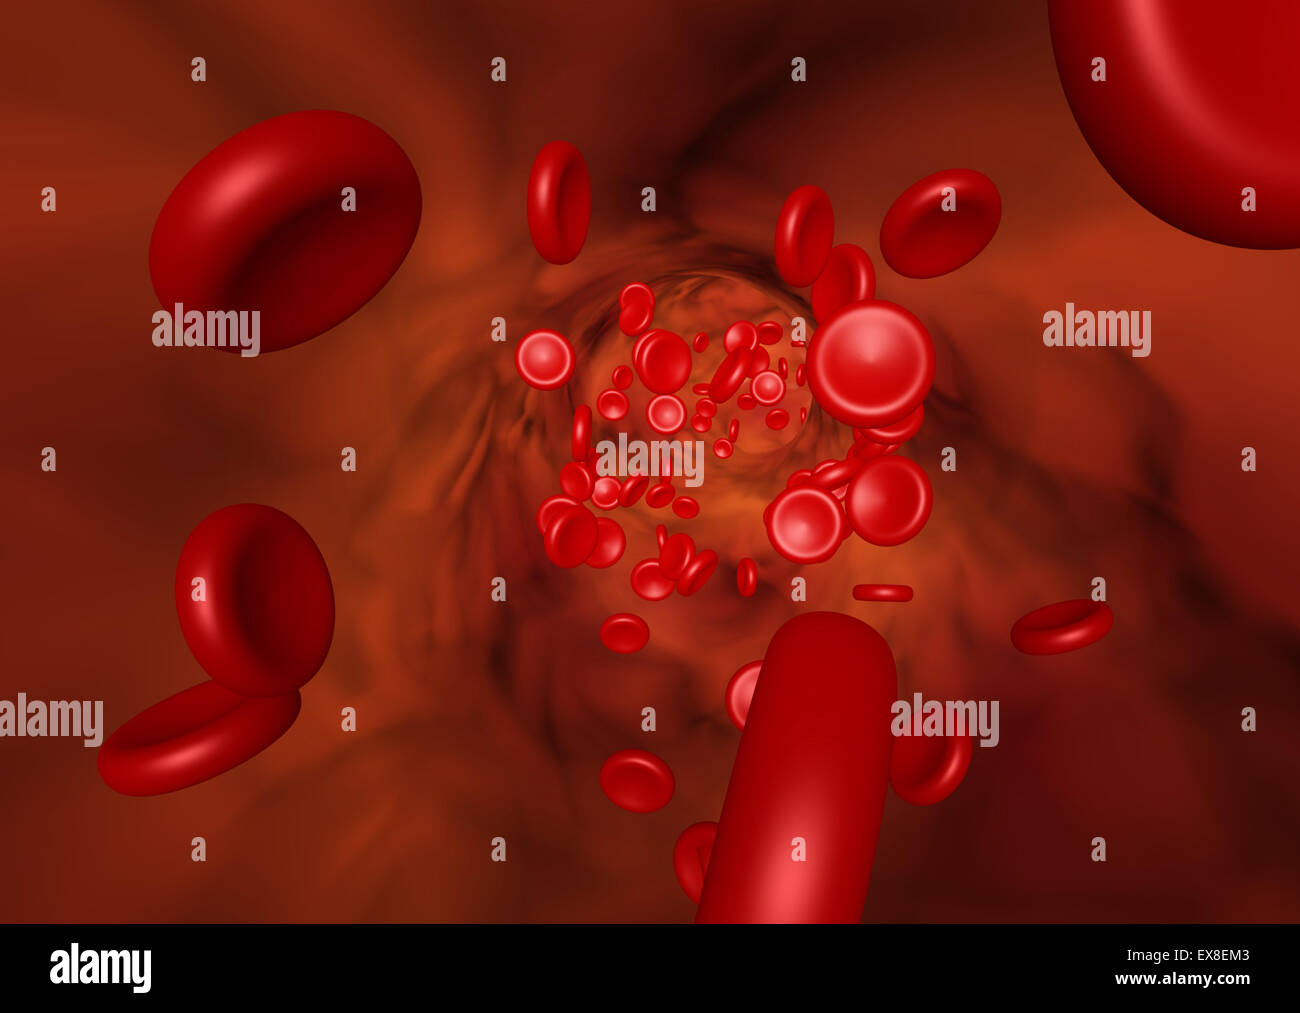 3D illustration showing the red blood cell flow Stock Photo